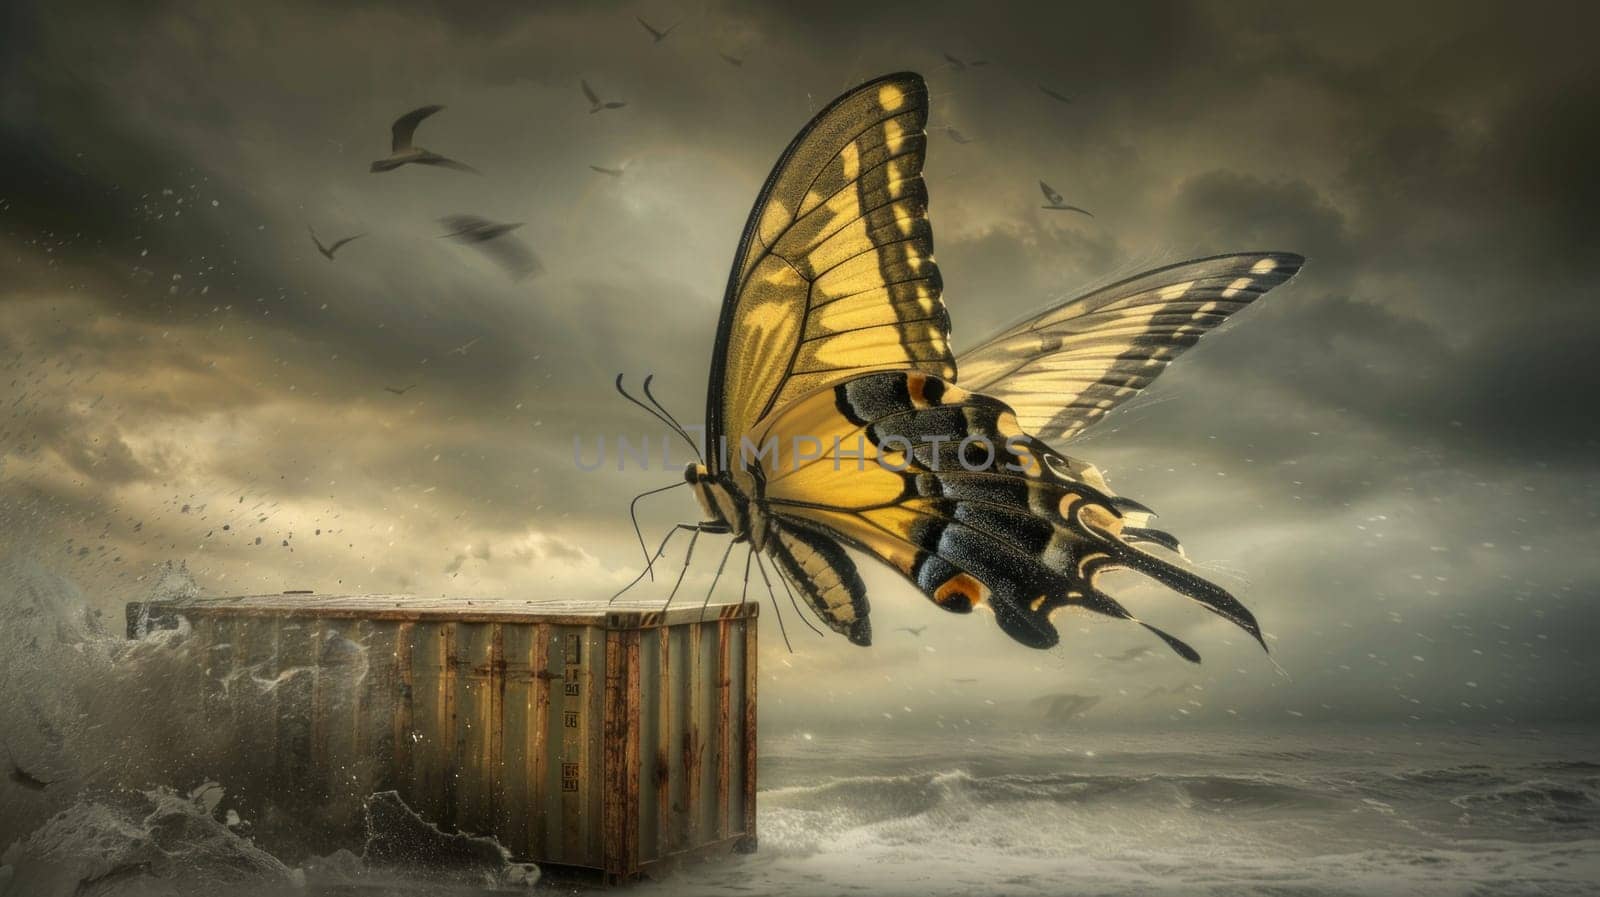 A delicate butterfly gracefully hovers over a trash can floating in the ocean, contrasting the beauty of nature with man-made waste.